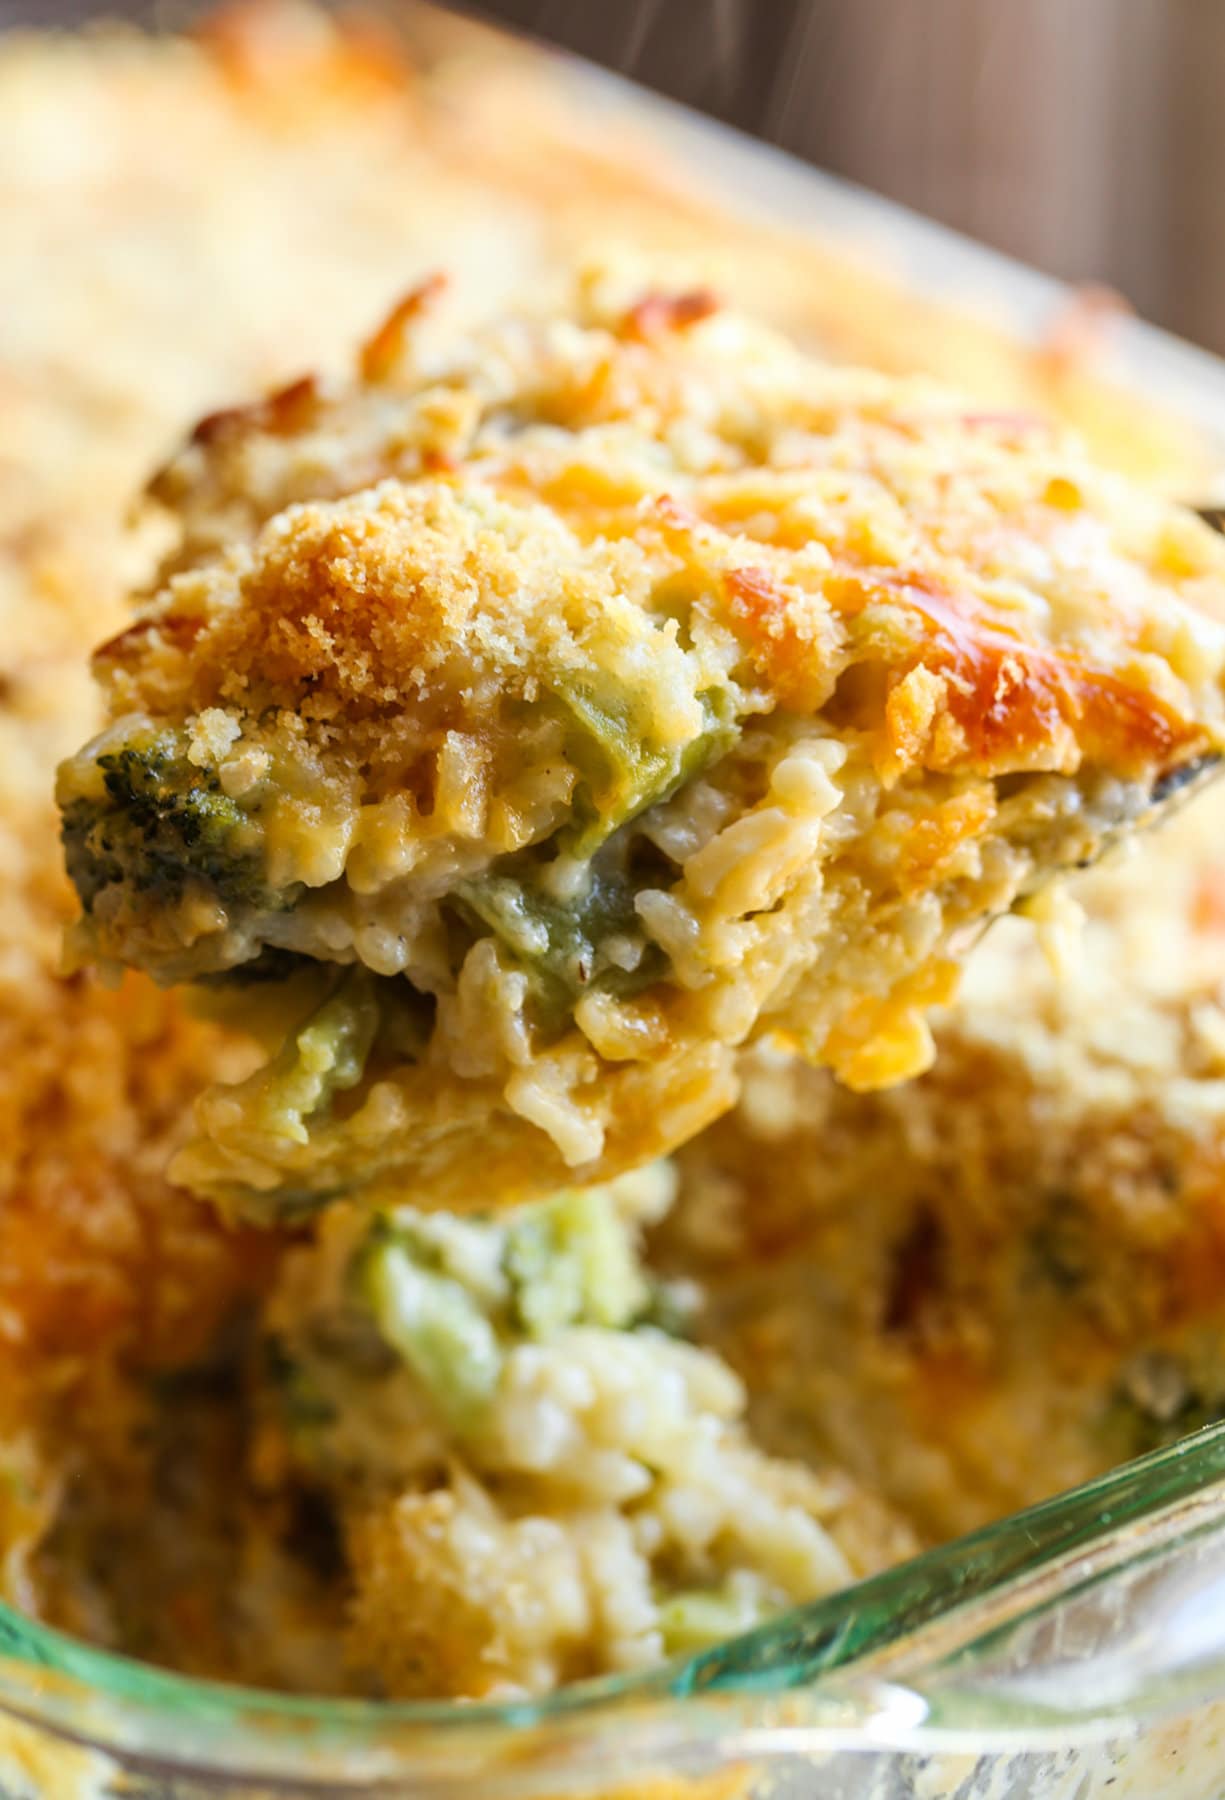 Scooping out a portion of broccoli rice bake with cheese in a casserole dish.